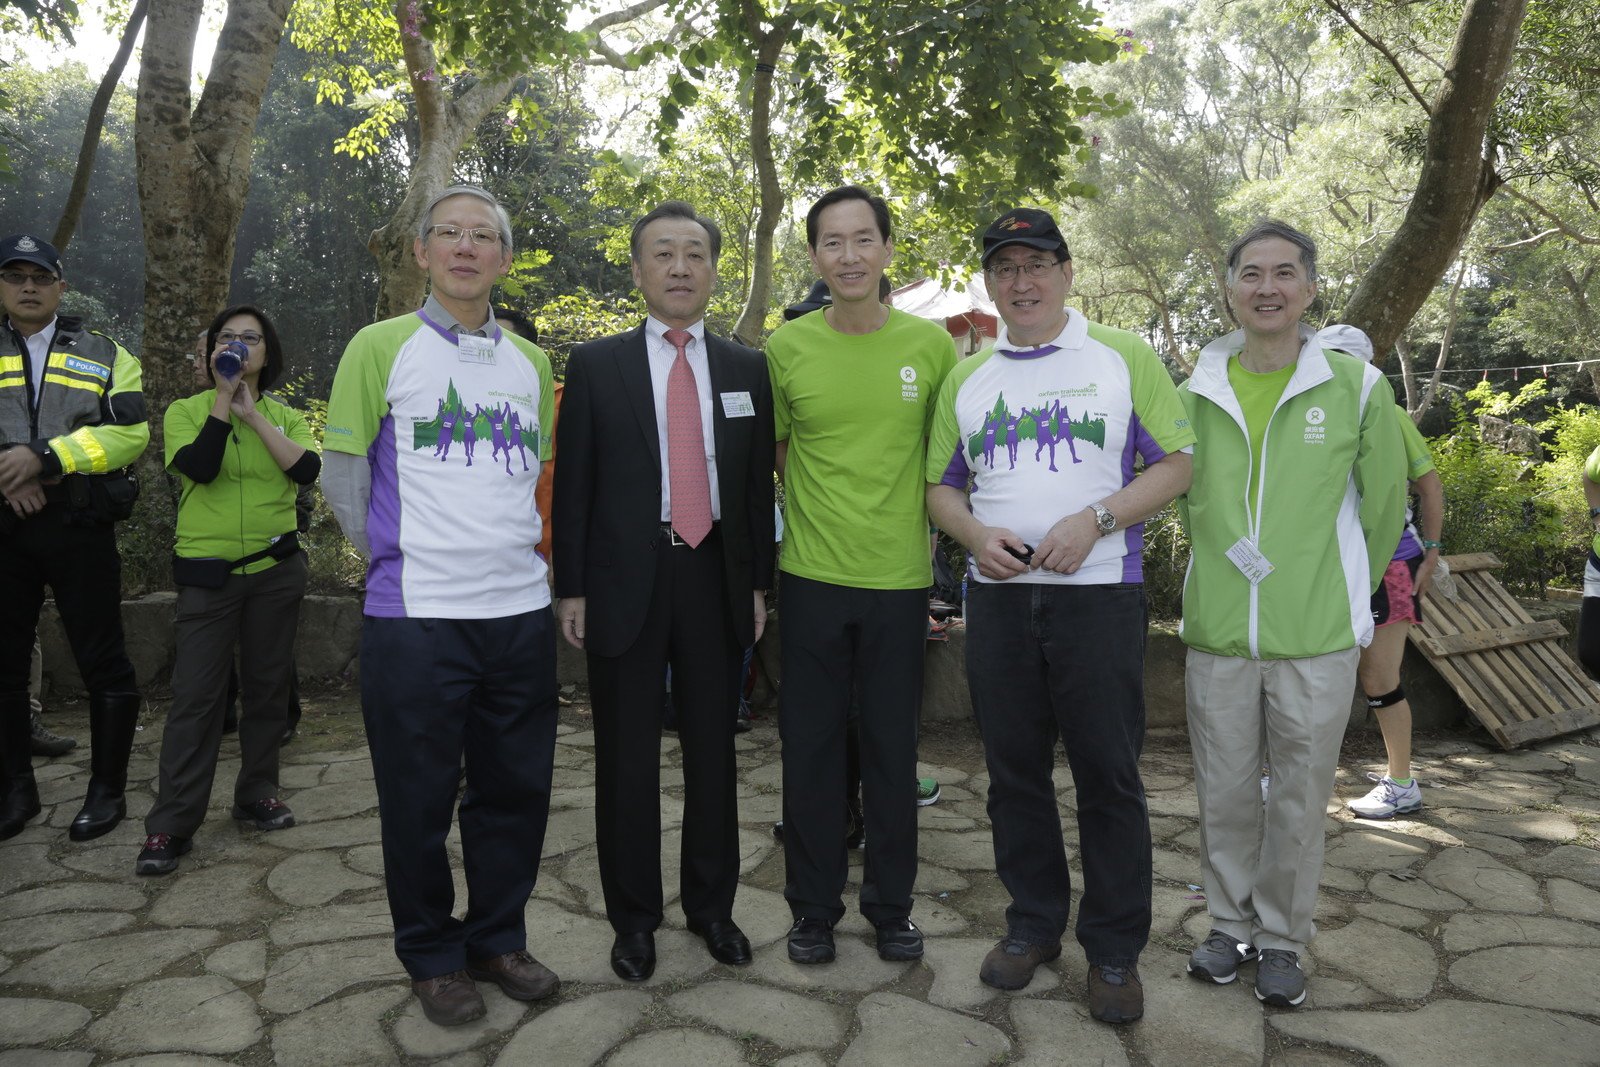 Oxfam Trailwalker Kick-Off Ceremony was held at 11am today and was officiated by Dr. Stephen Fisher, Director General, Oxfam Hong Kong (first from right), Dr York Chow Yat-Ngok, Chairperson, Equal Opportunities Commission (second from right); Mr. Bernard Chan, Chairman, Oxfam Trailwalker Advisory Committee (third from right) and Dr. Lo Chi Kin, J.P., Chair, Oxfam Hong Kong Council (first from left).